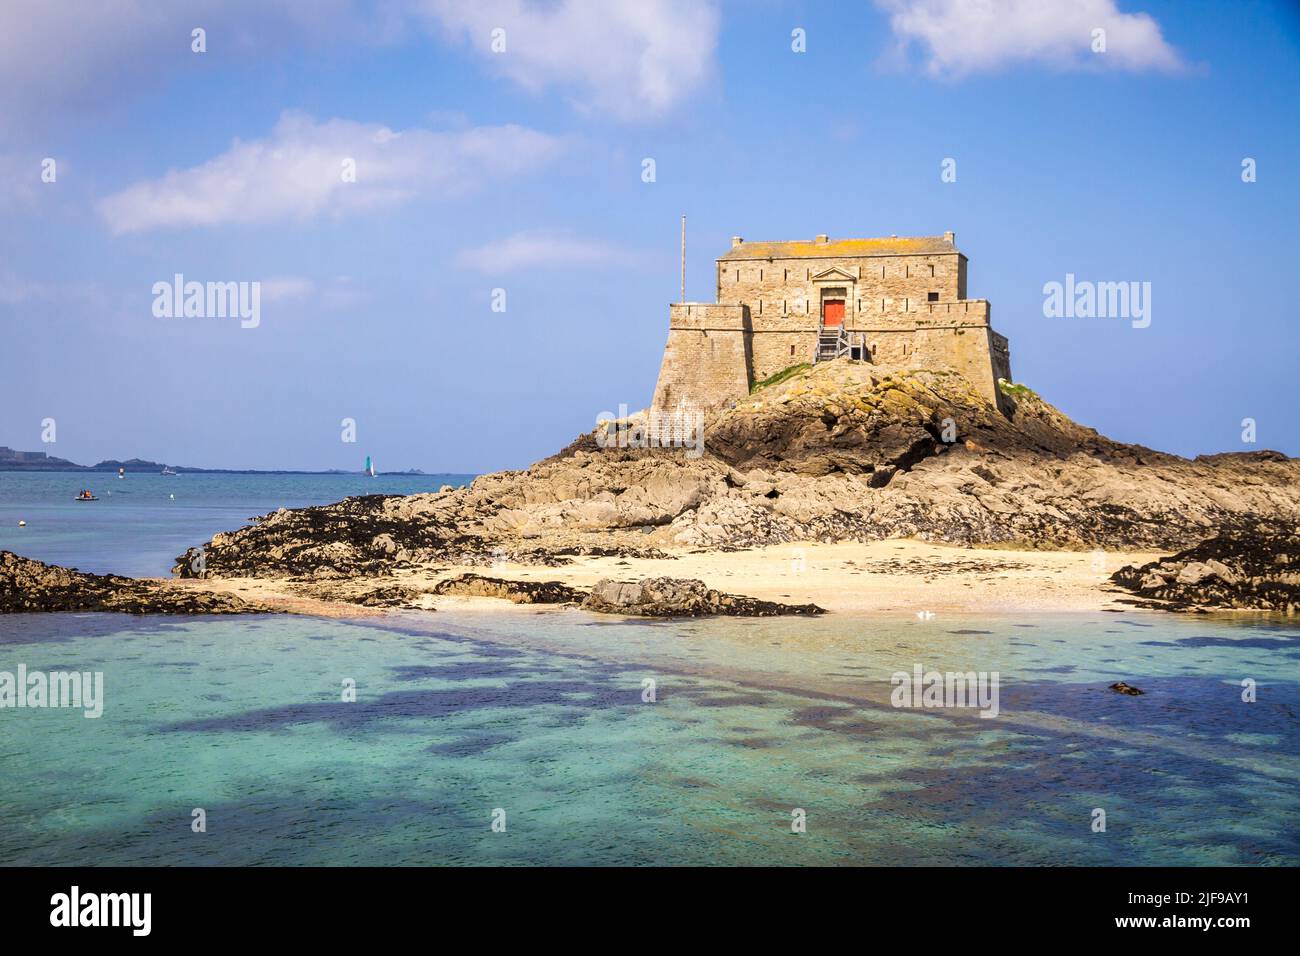 Fortified castel, Fort du Petit Be, beach and sea in Saint-Malo city, Brittany, France Stock Photo